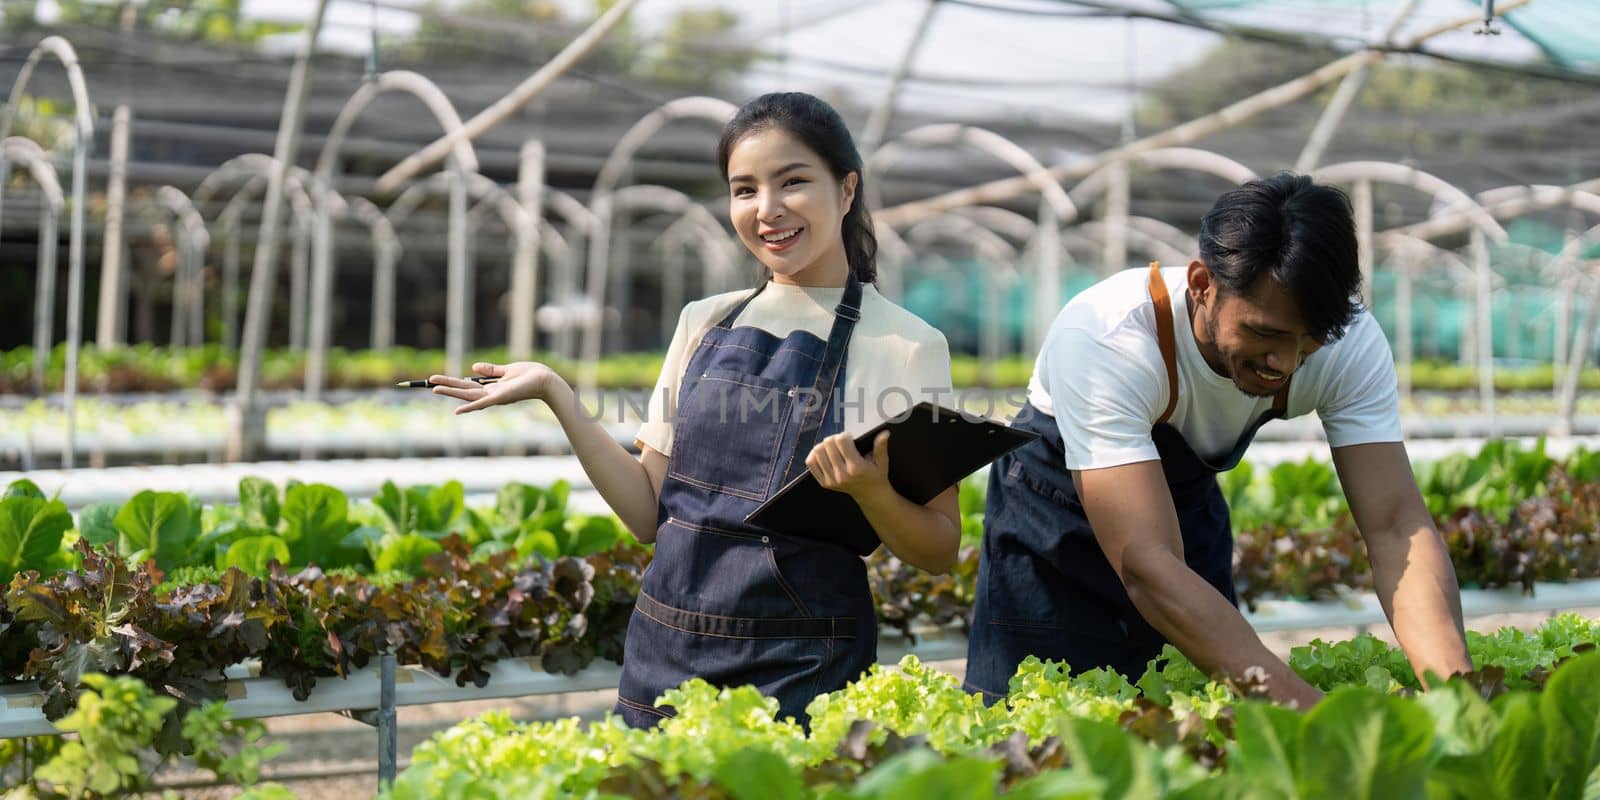 Asian woman and man farmer working together in organic hydroponic salad vegetable farm. inspect quality of lettuce in greenhouse garden by nateemee